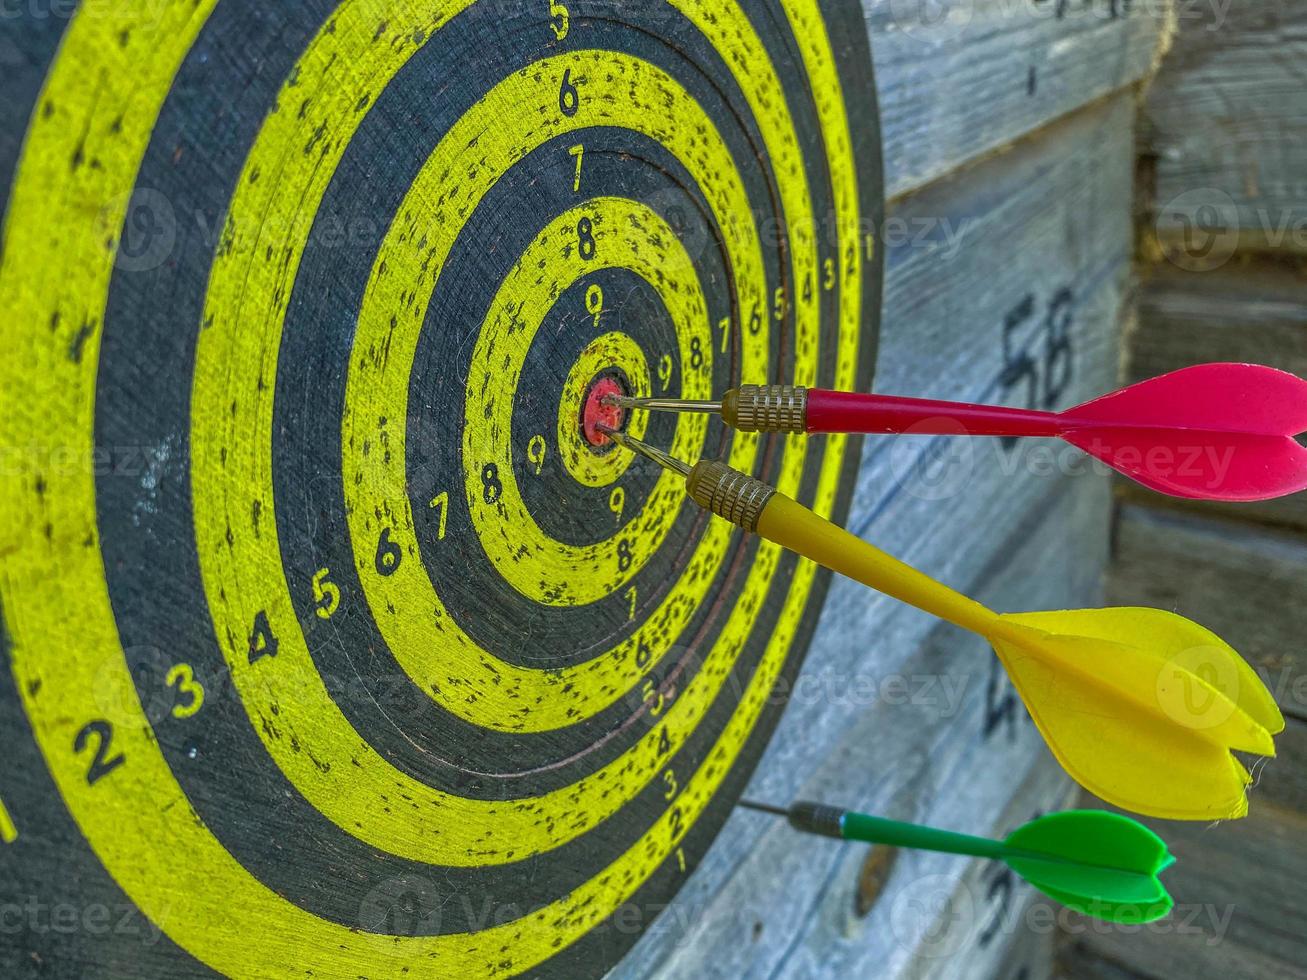 active play. throwing darts. darts outdoors. a round field with black and yellow markings with points for hitting the target. bright darts inside photo